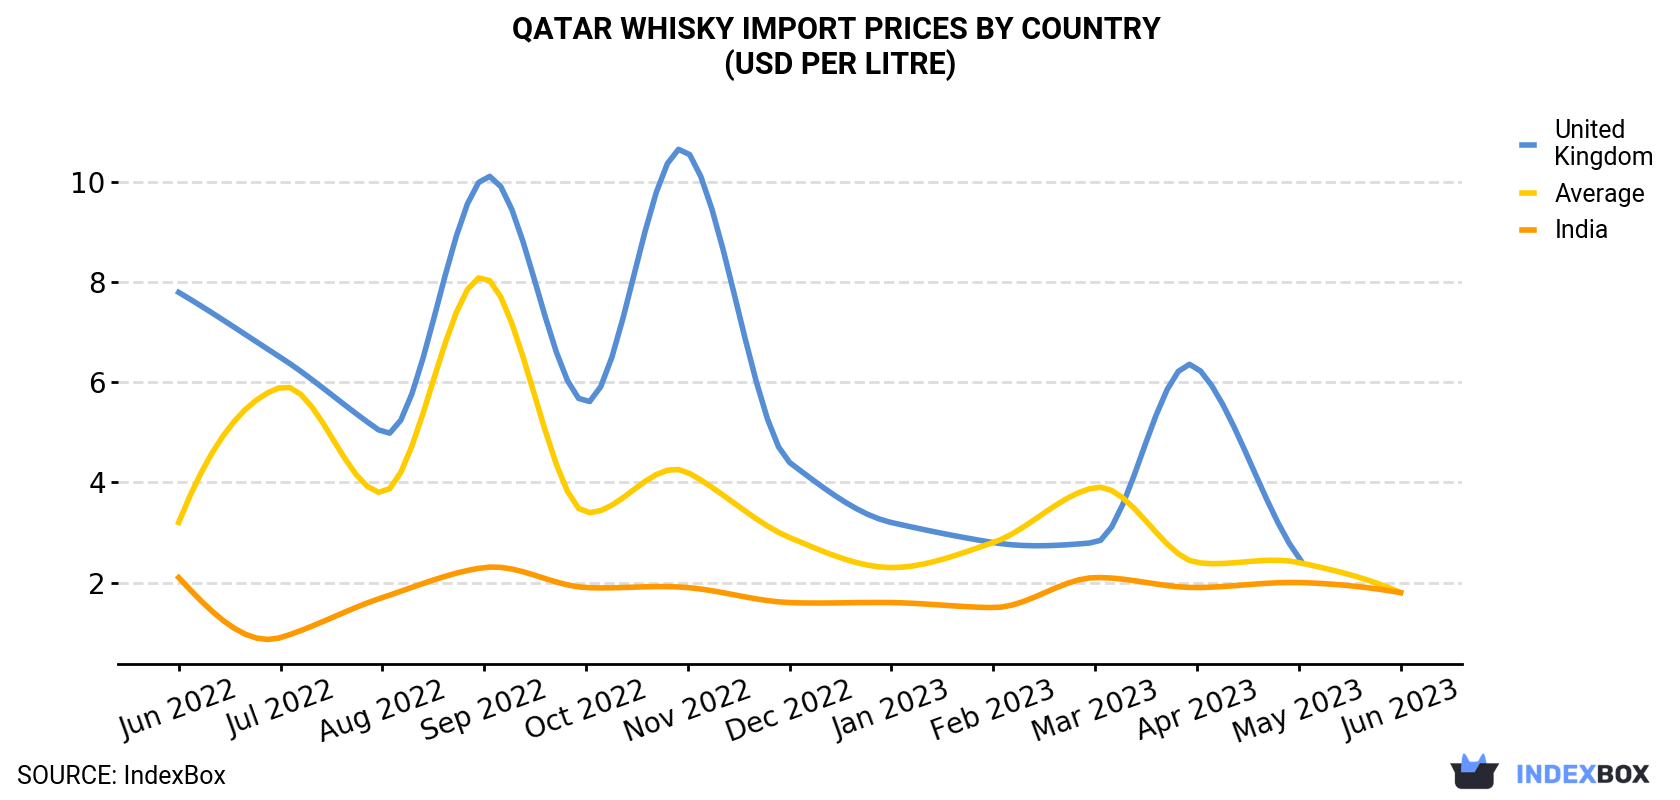 Qatar Whisky Import Prices By Country (USD Per Litre)